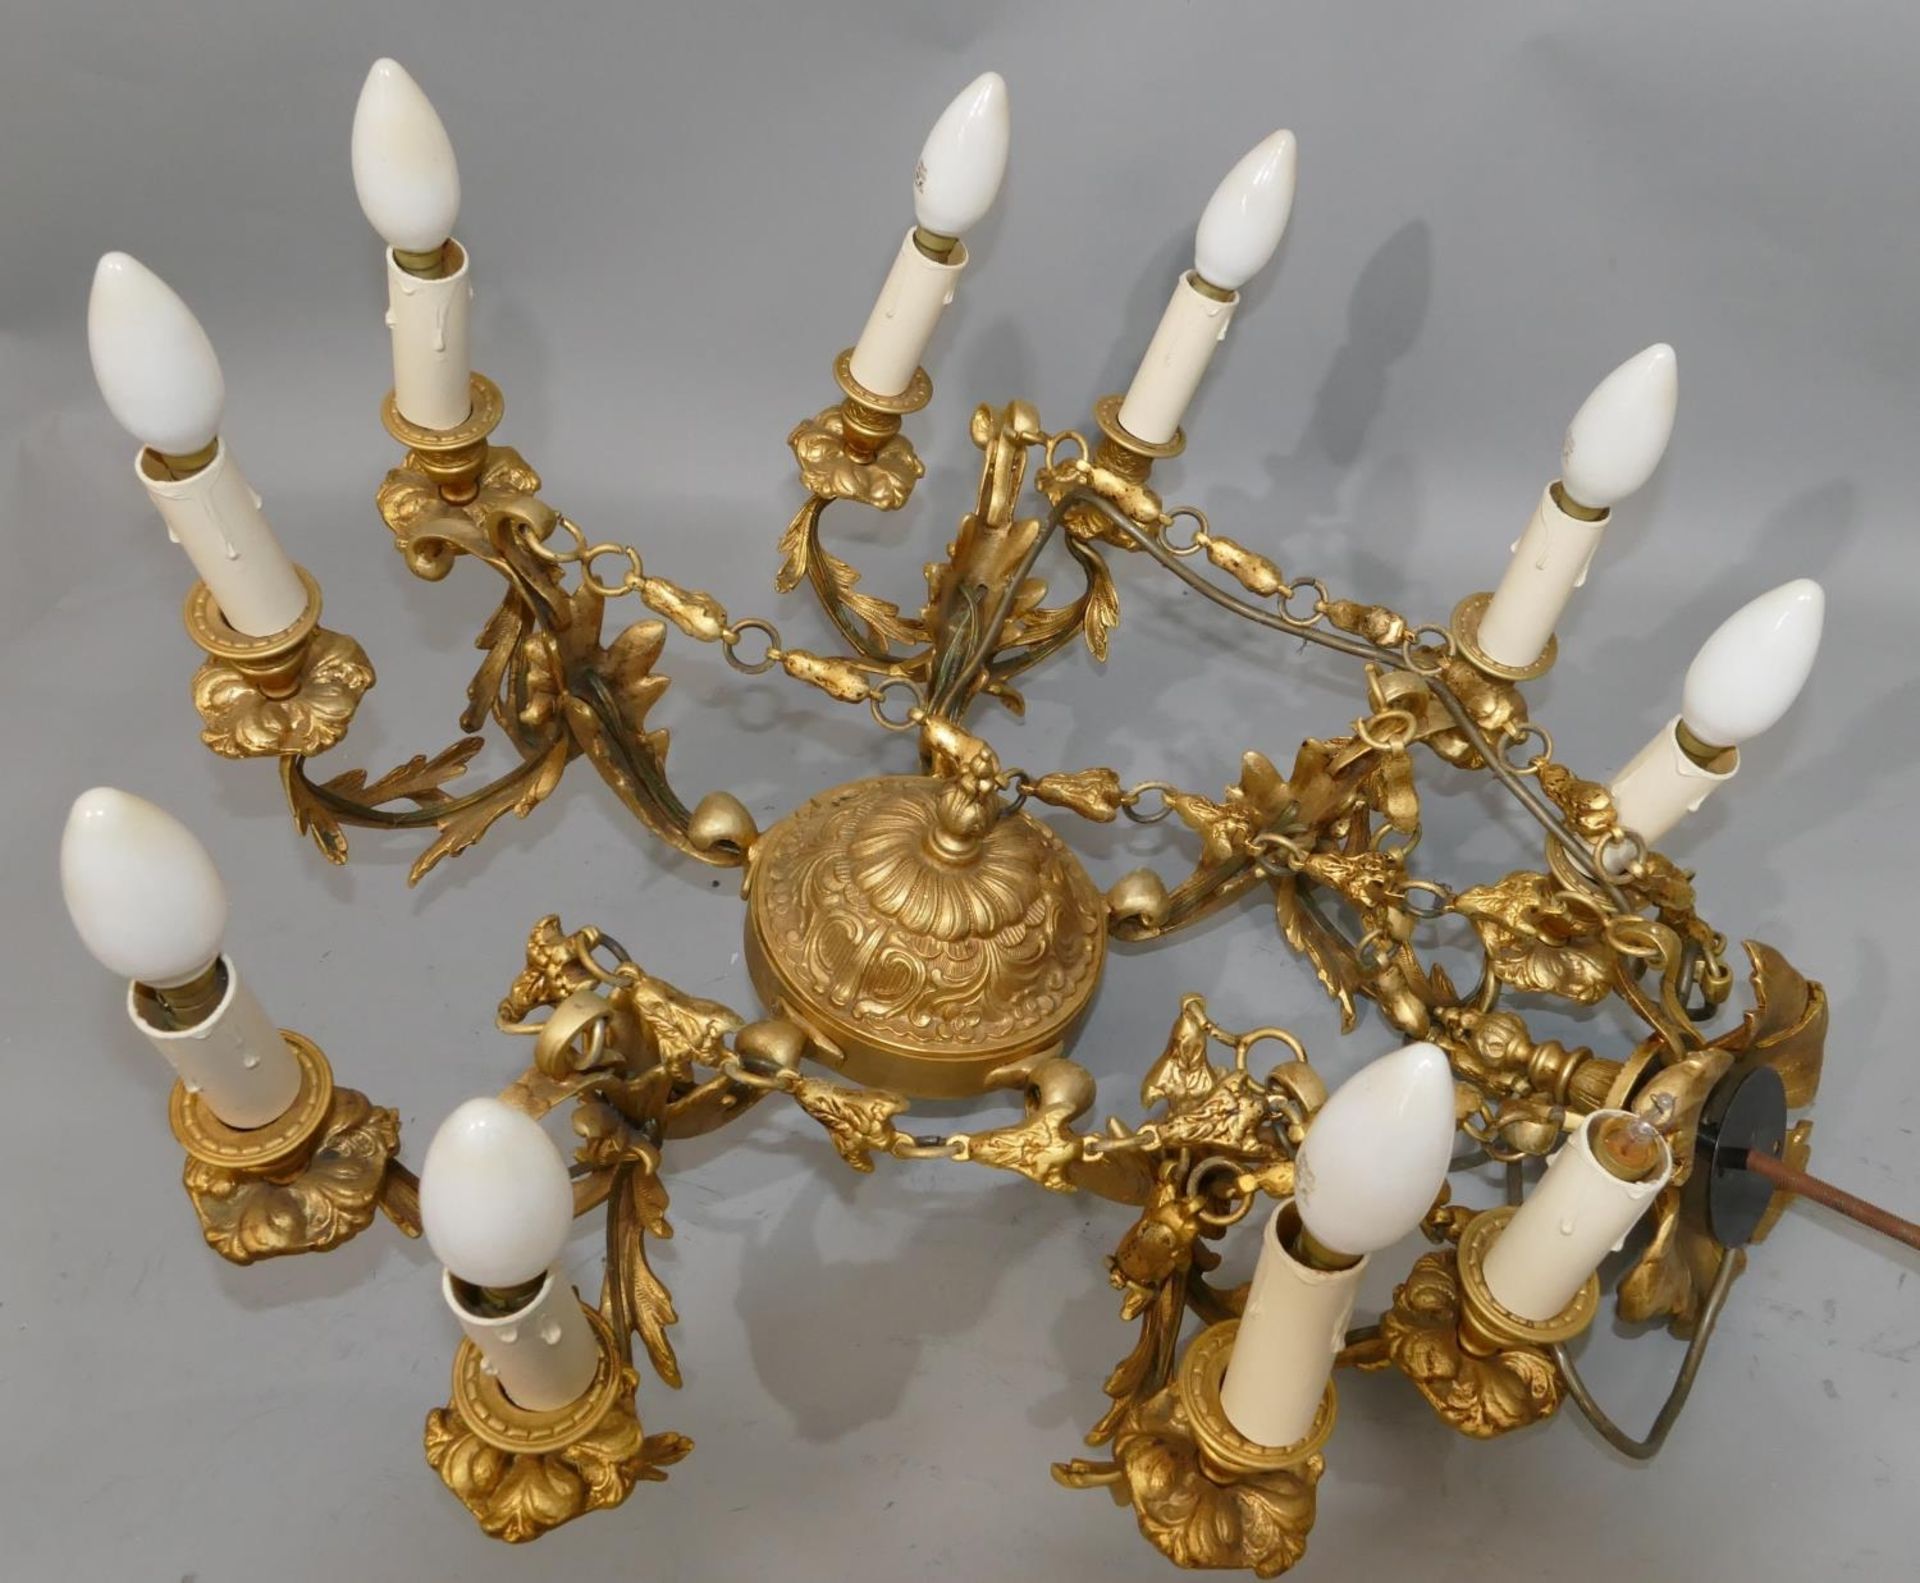 French Chandelier Highly Ornate Detail With Gold Gilt Over Bronze In The Louis XVI Style. - Image 2 of 2